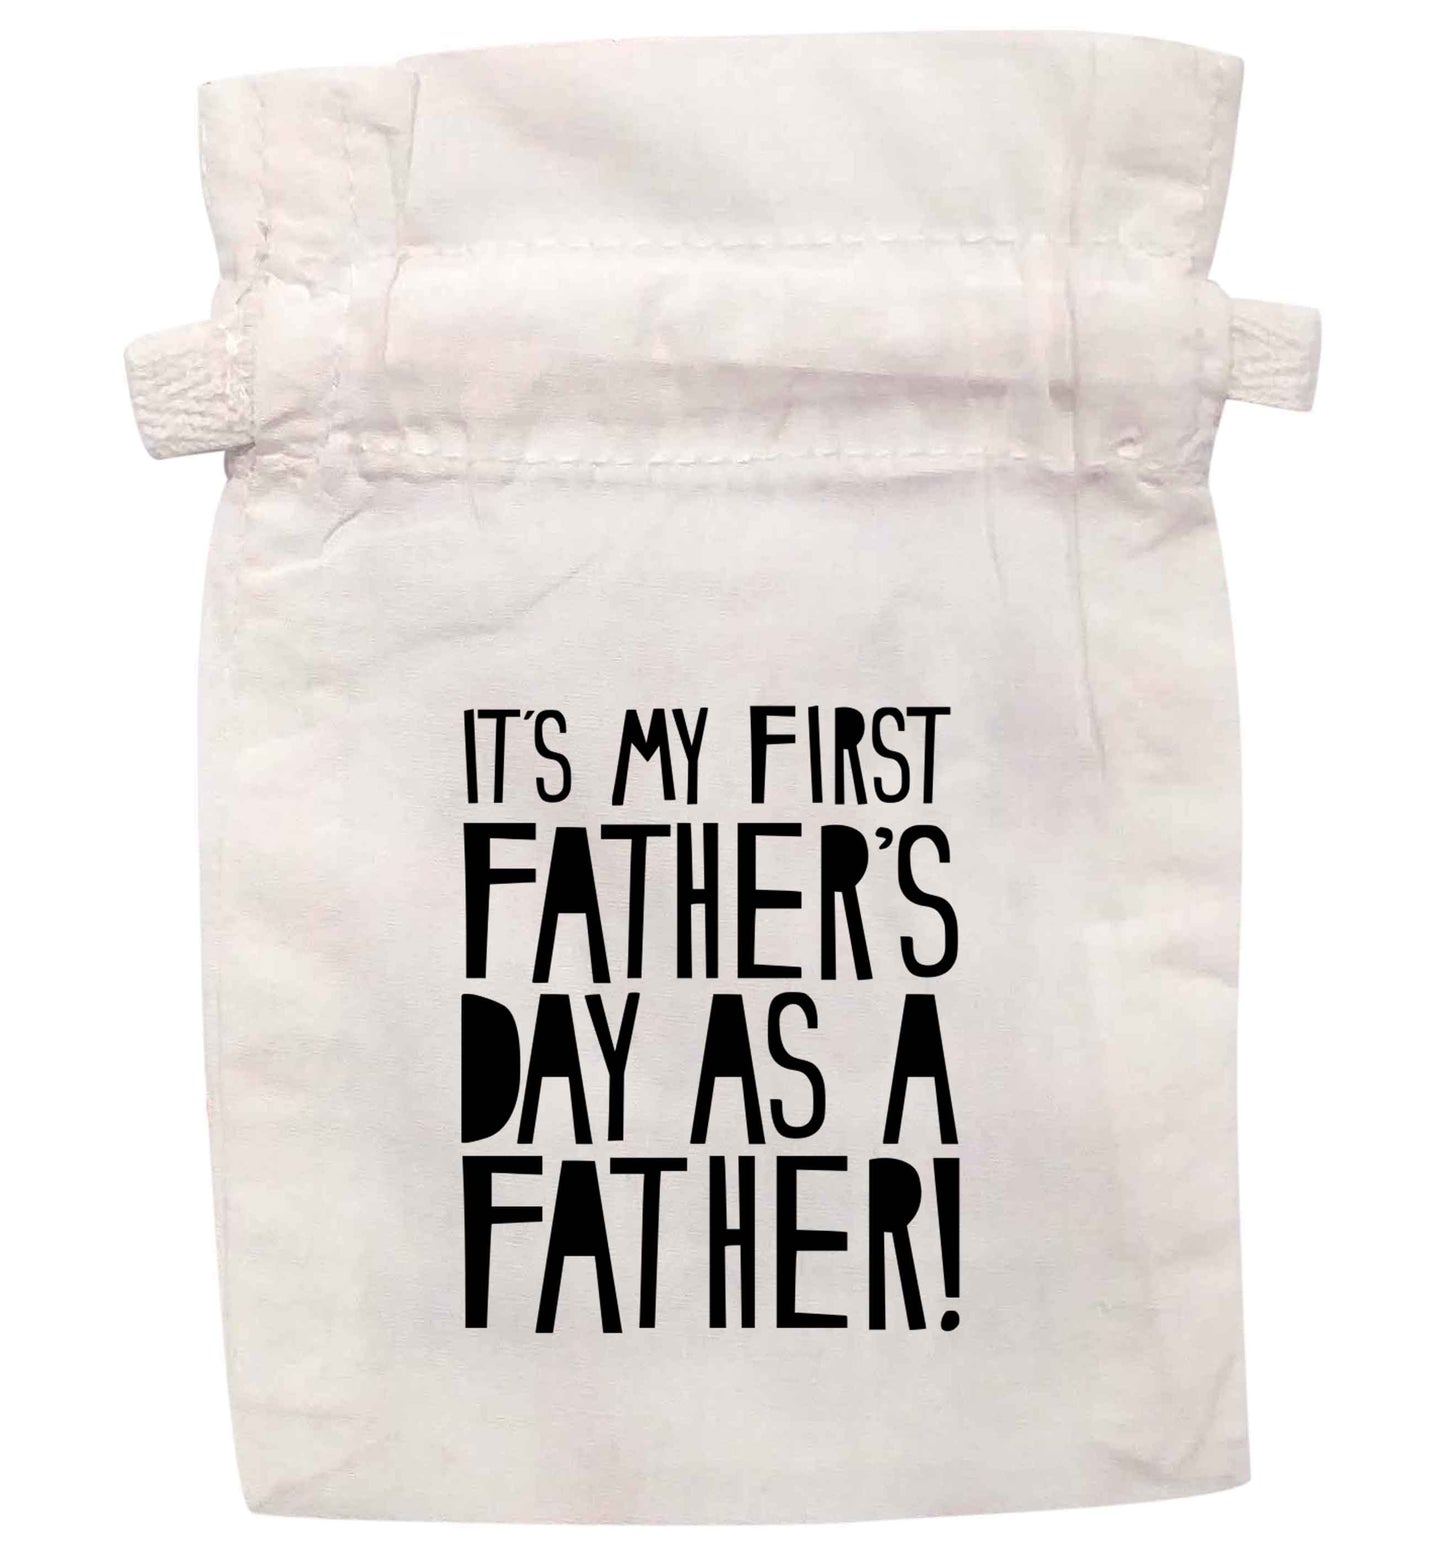 It's my first father's day as a father! | XS - L | Pouch / Drawstring bag / Sack | Organic Cotton | Bulk discounts available!